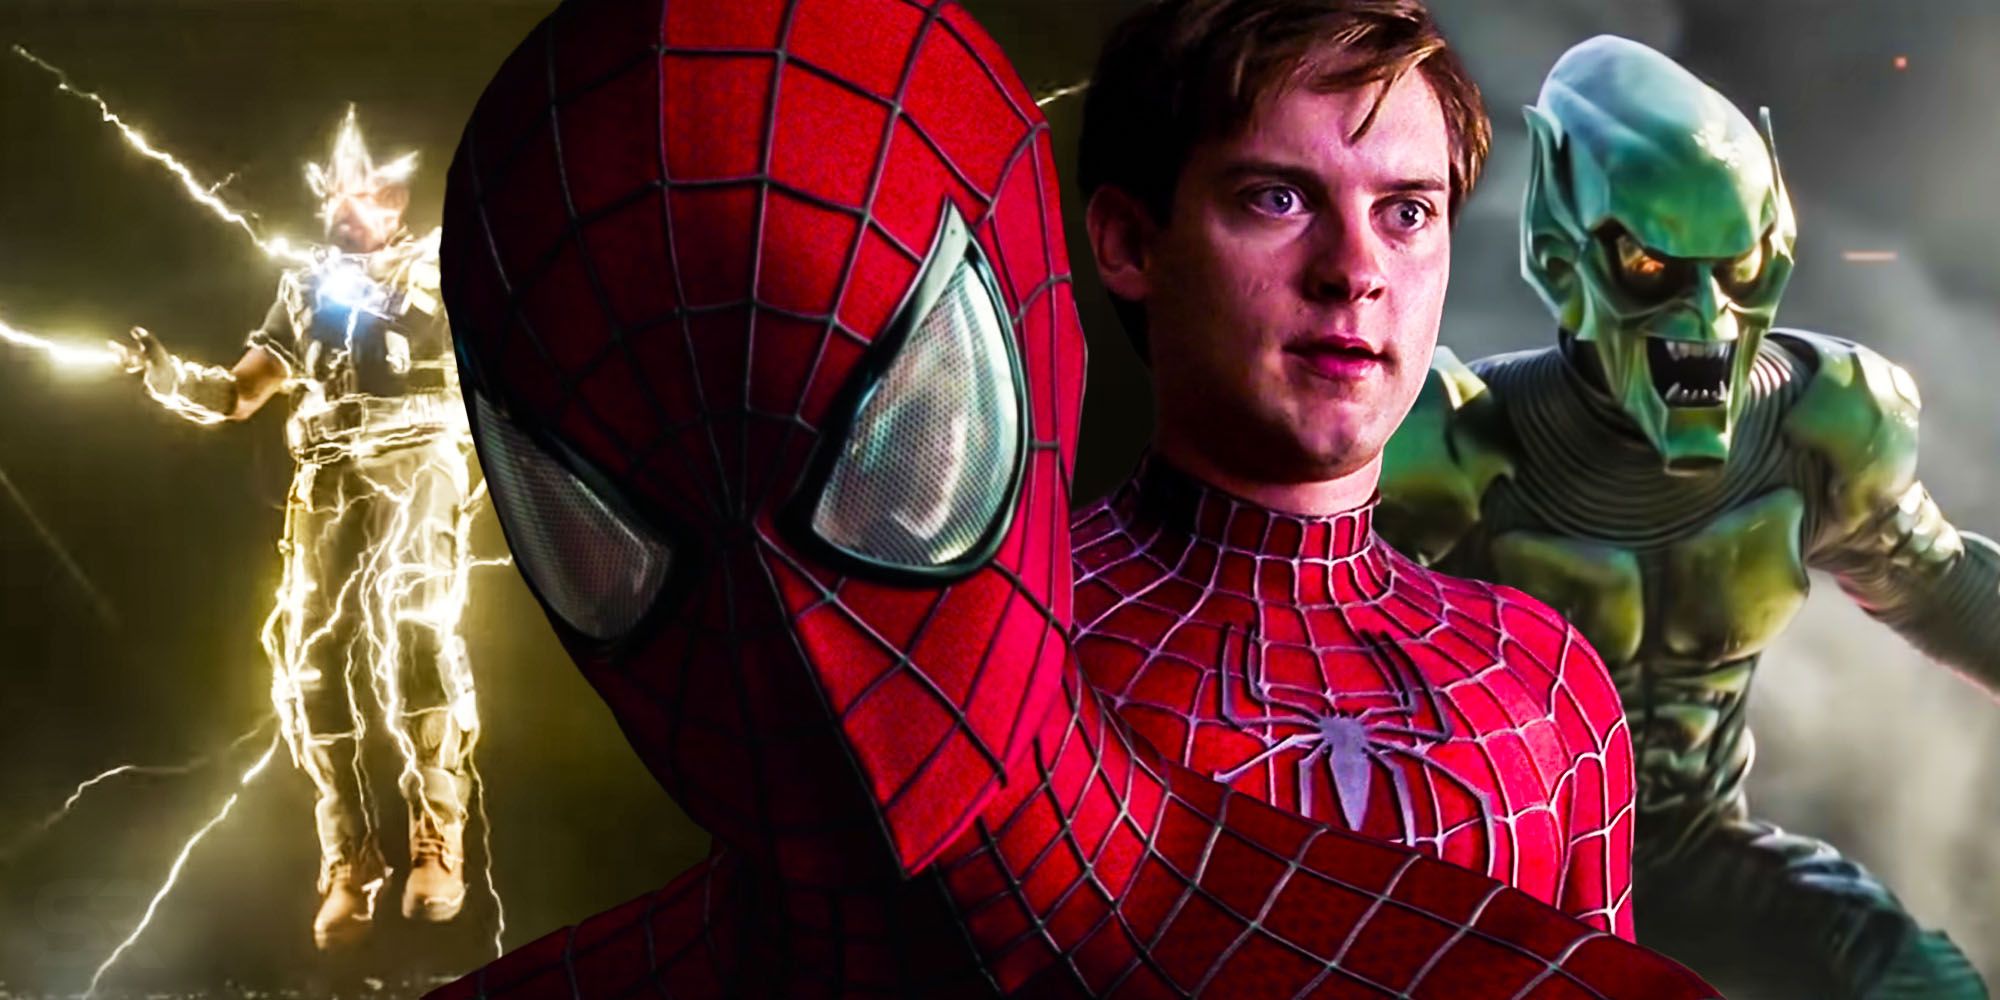 Spider man no way home when in Tobey maguire and Andrew Garfield timeline are the villains from